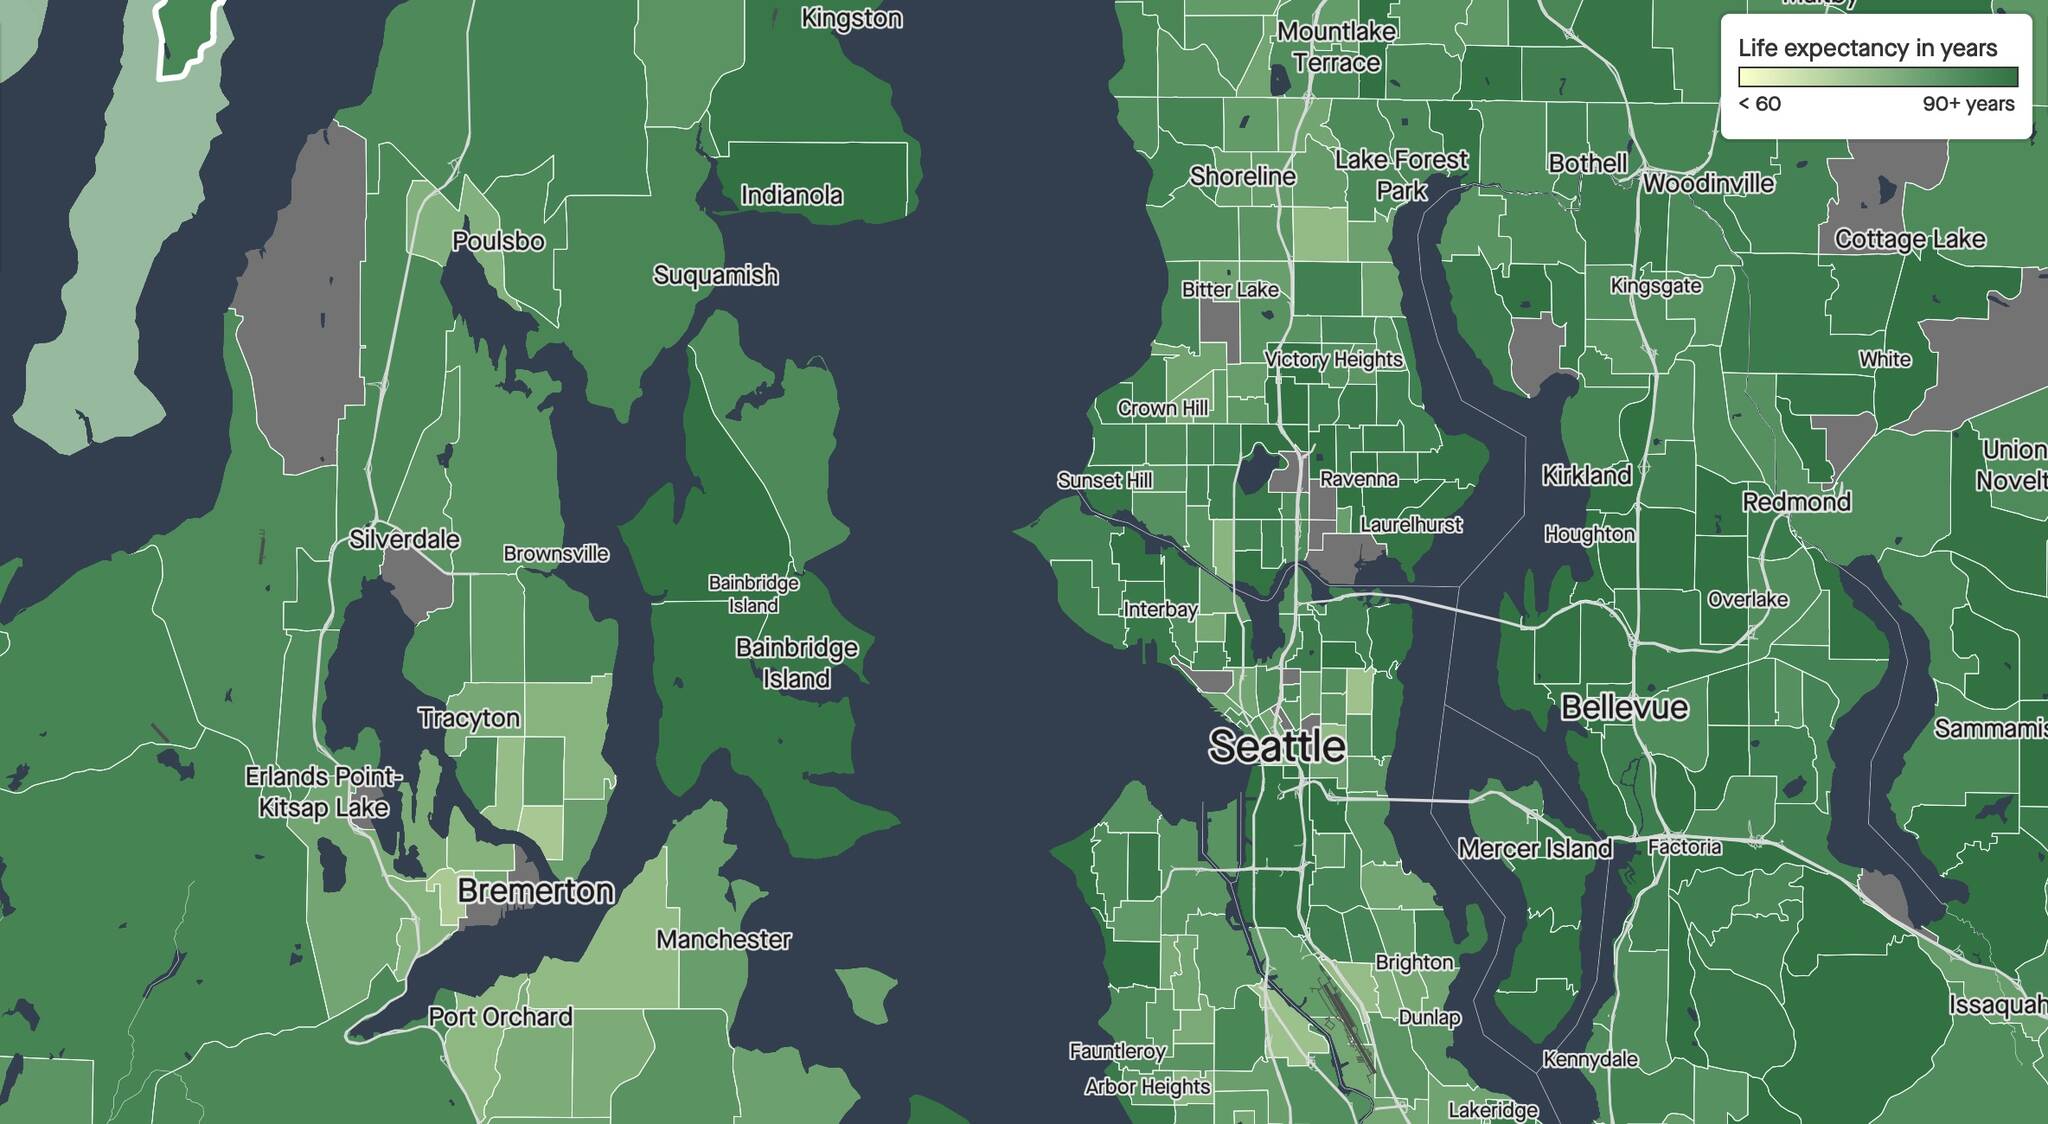 Molly Hetherwick/Kitsap News Group
Screen capture of a census-designated map demonstrating average life expectancy for the immediate Puget Sound region, with data circa 2015. Most trends are consistent.